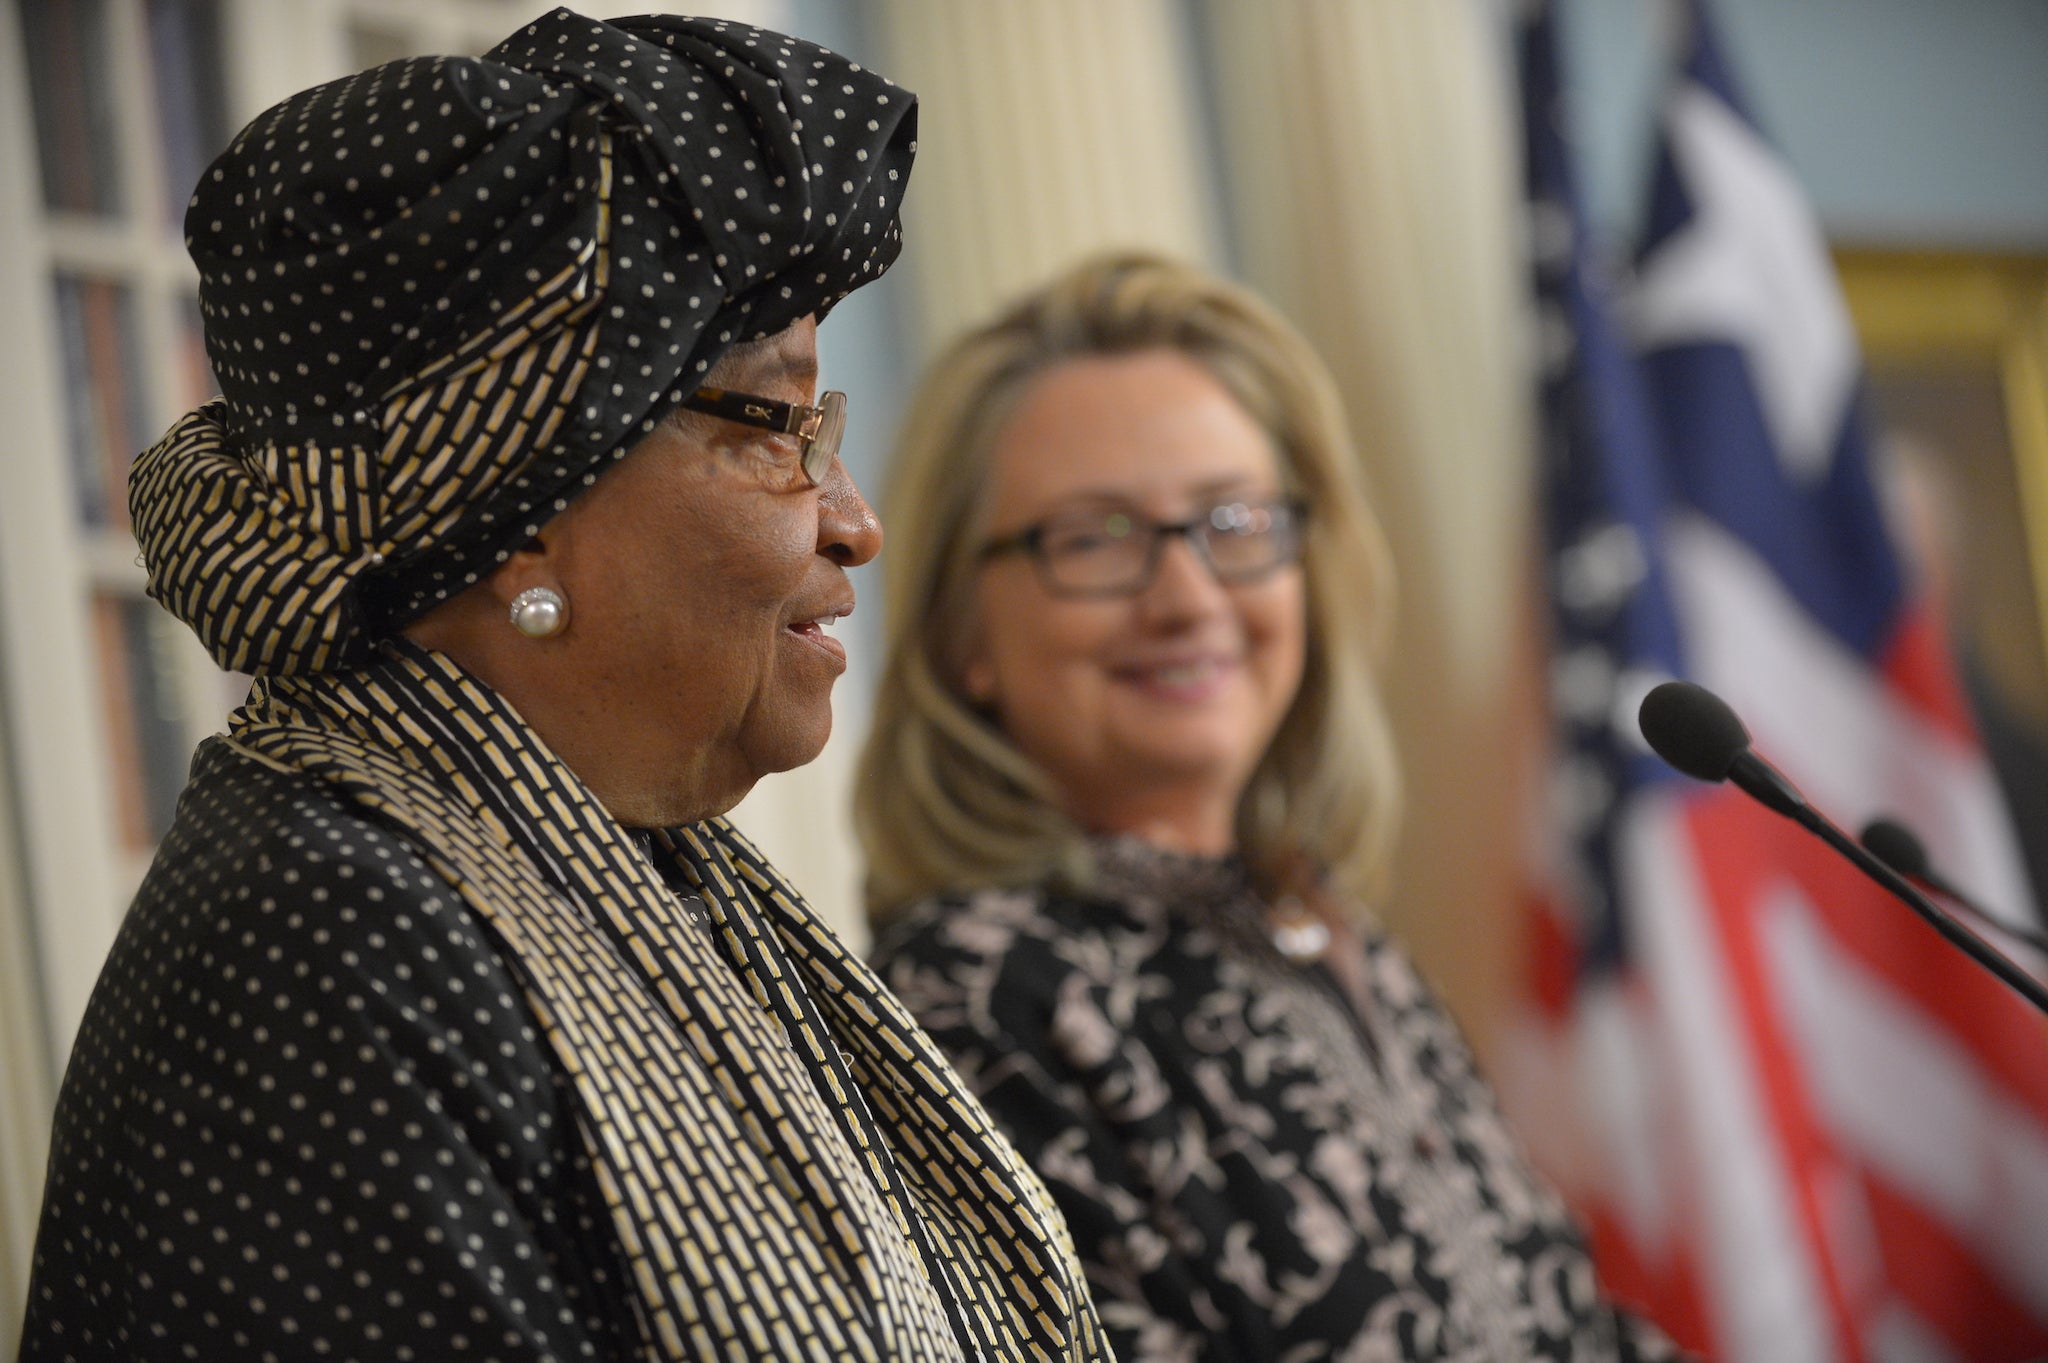 Liberian President Ellen Johnson Sirleaf speaks to the press with then-Secretary of State Hillary Clinton following a bilateral meeting on 15 January 2013 in Washington, DC